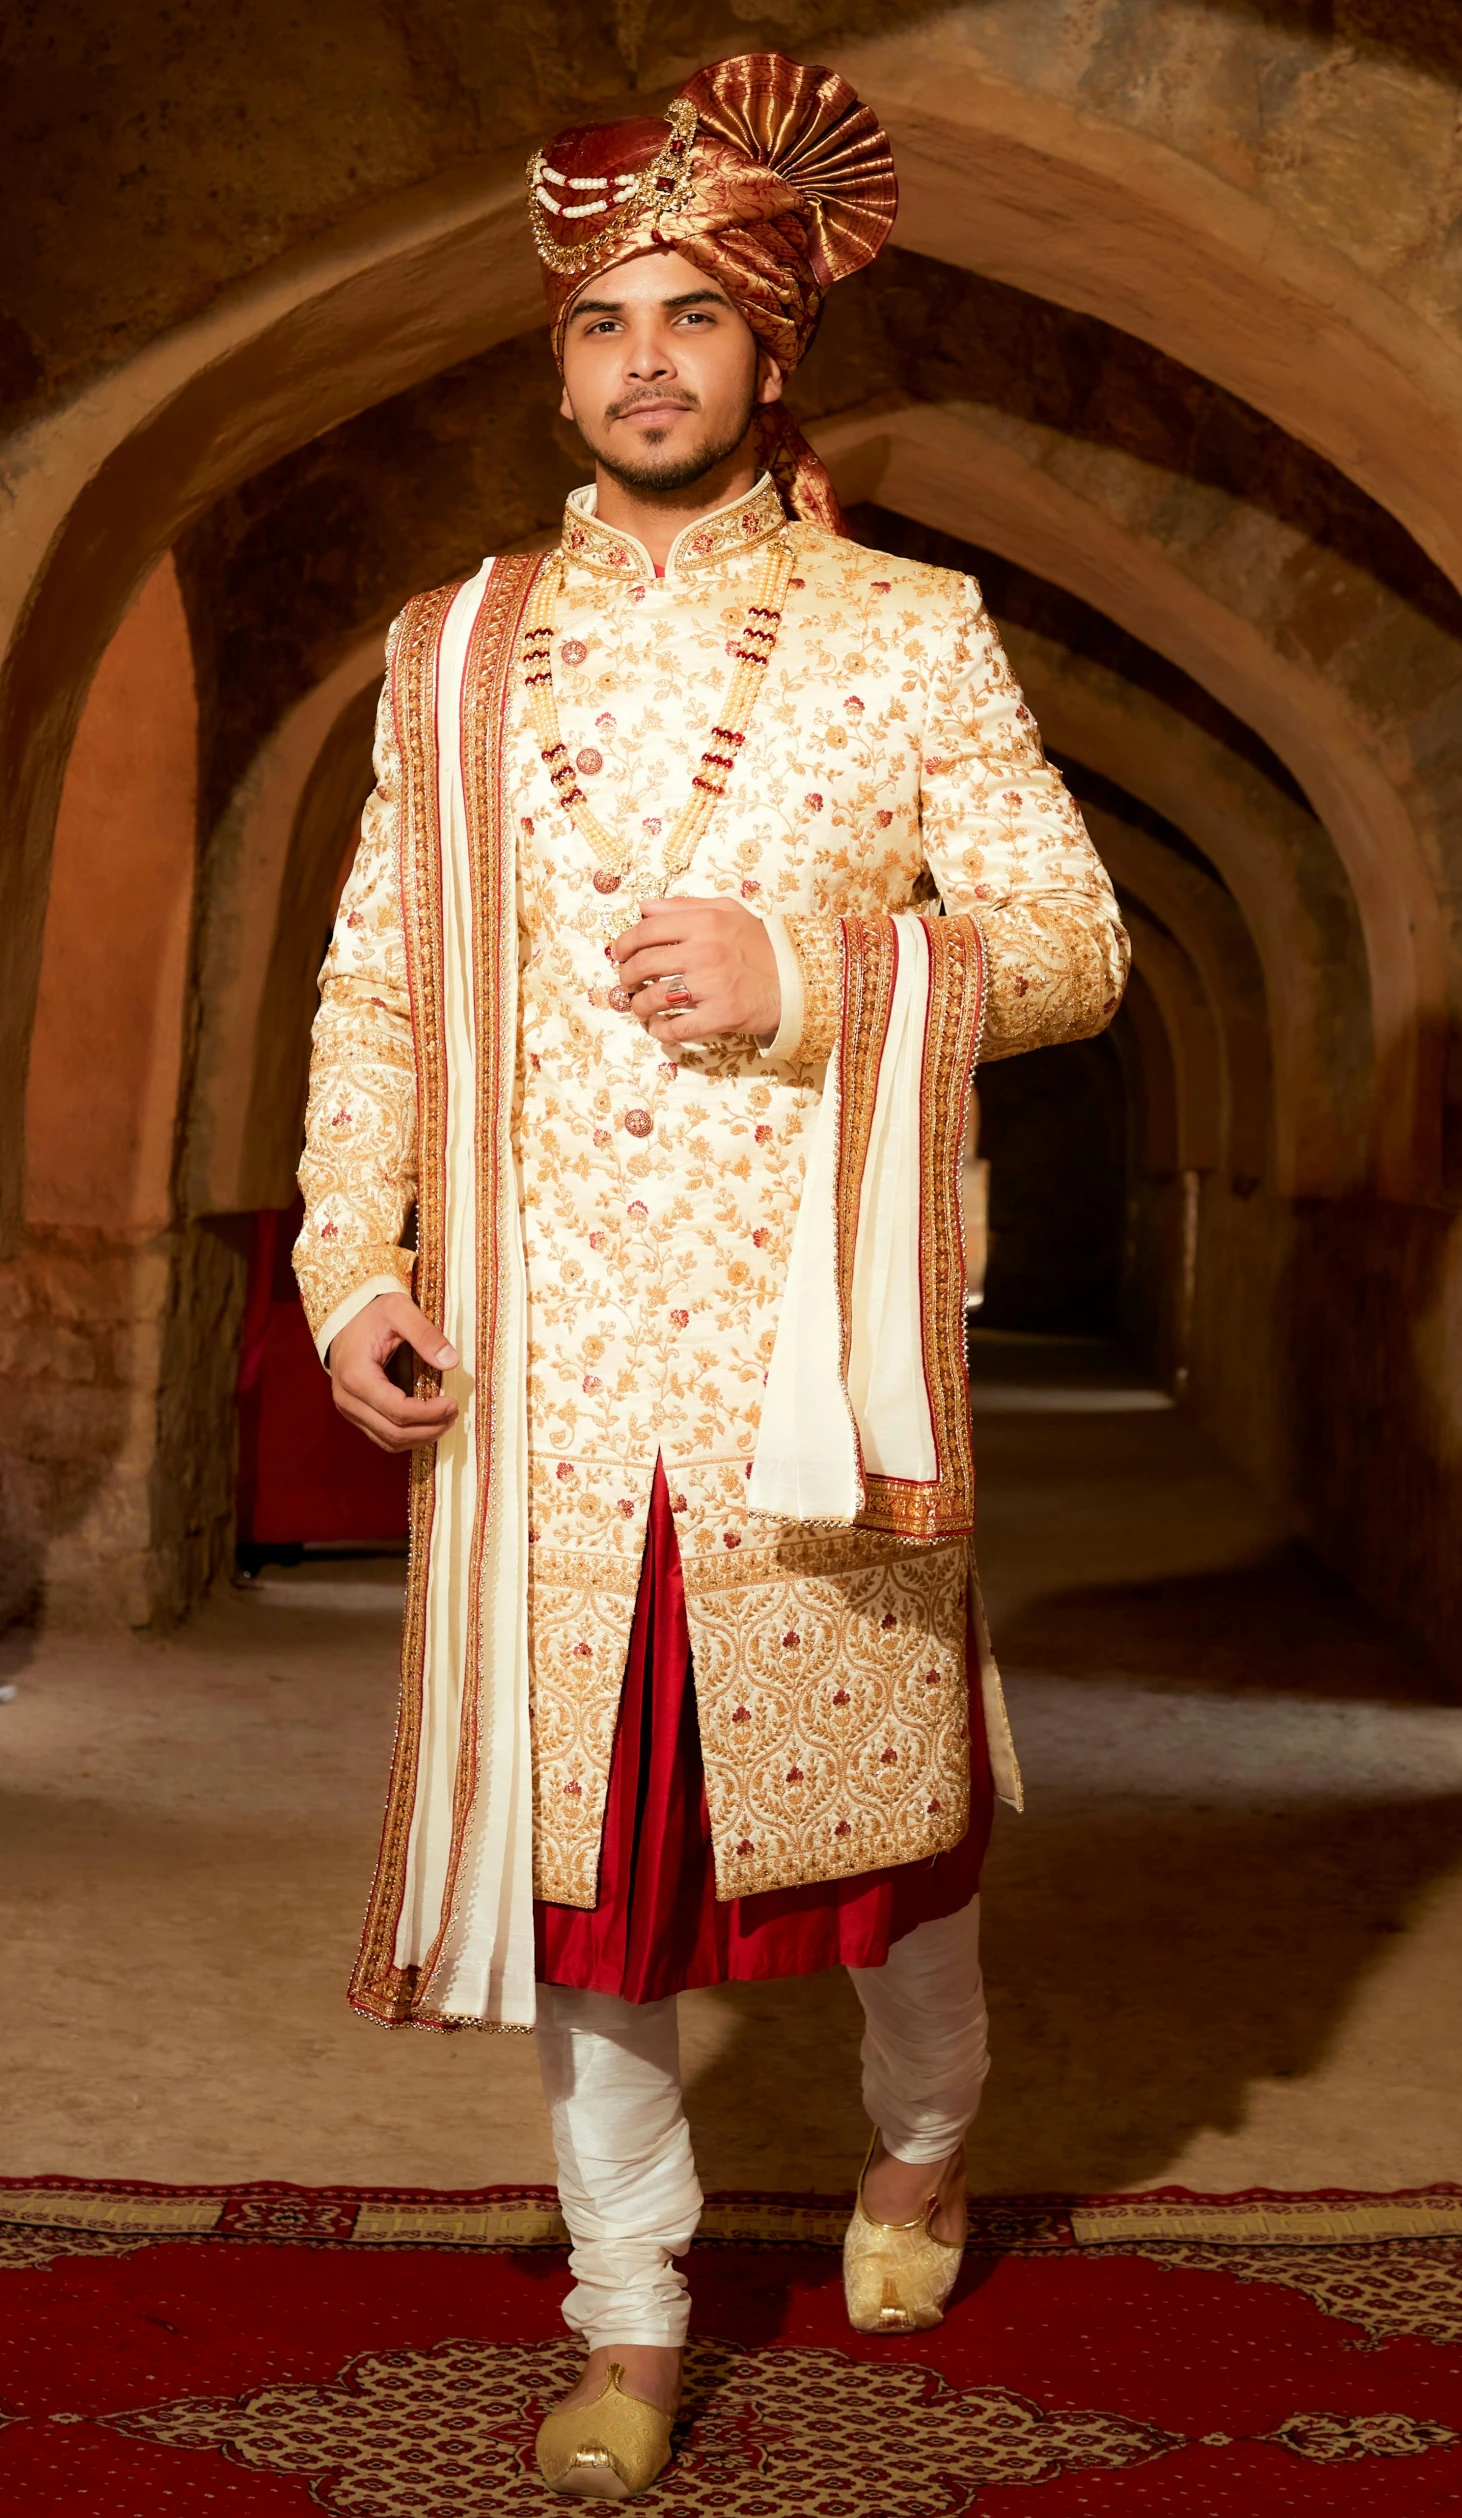 a man in a traditional indian outfit stands smiling for the camera